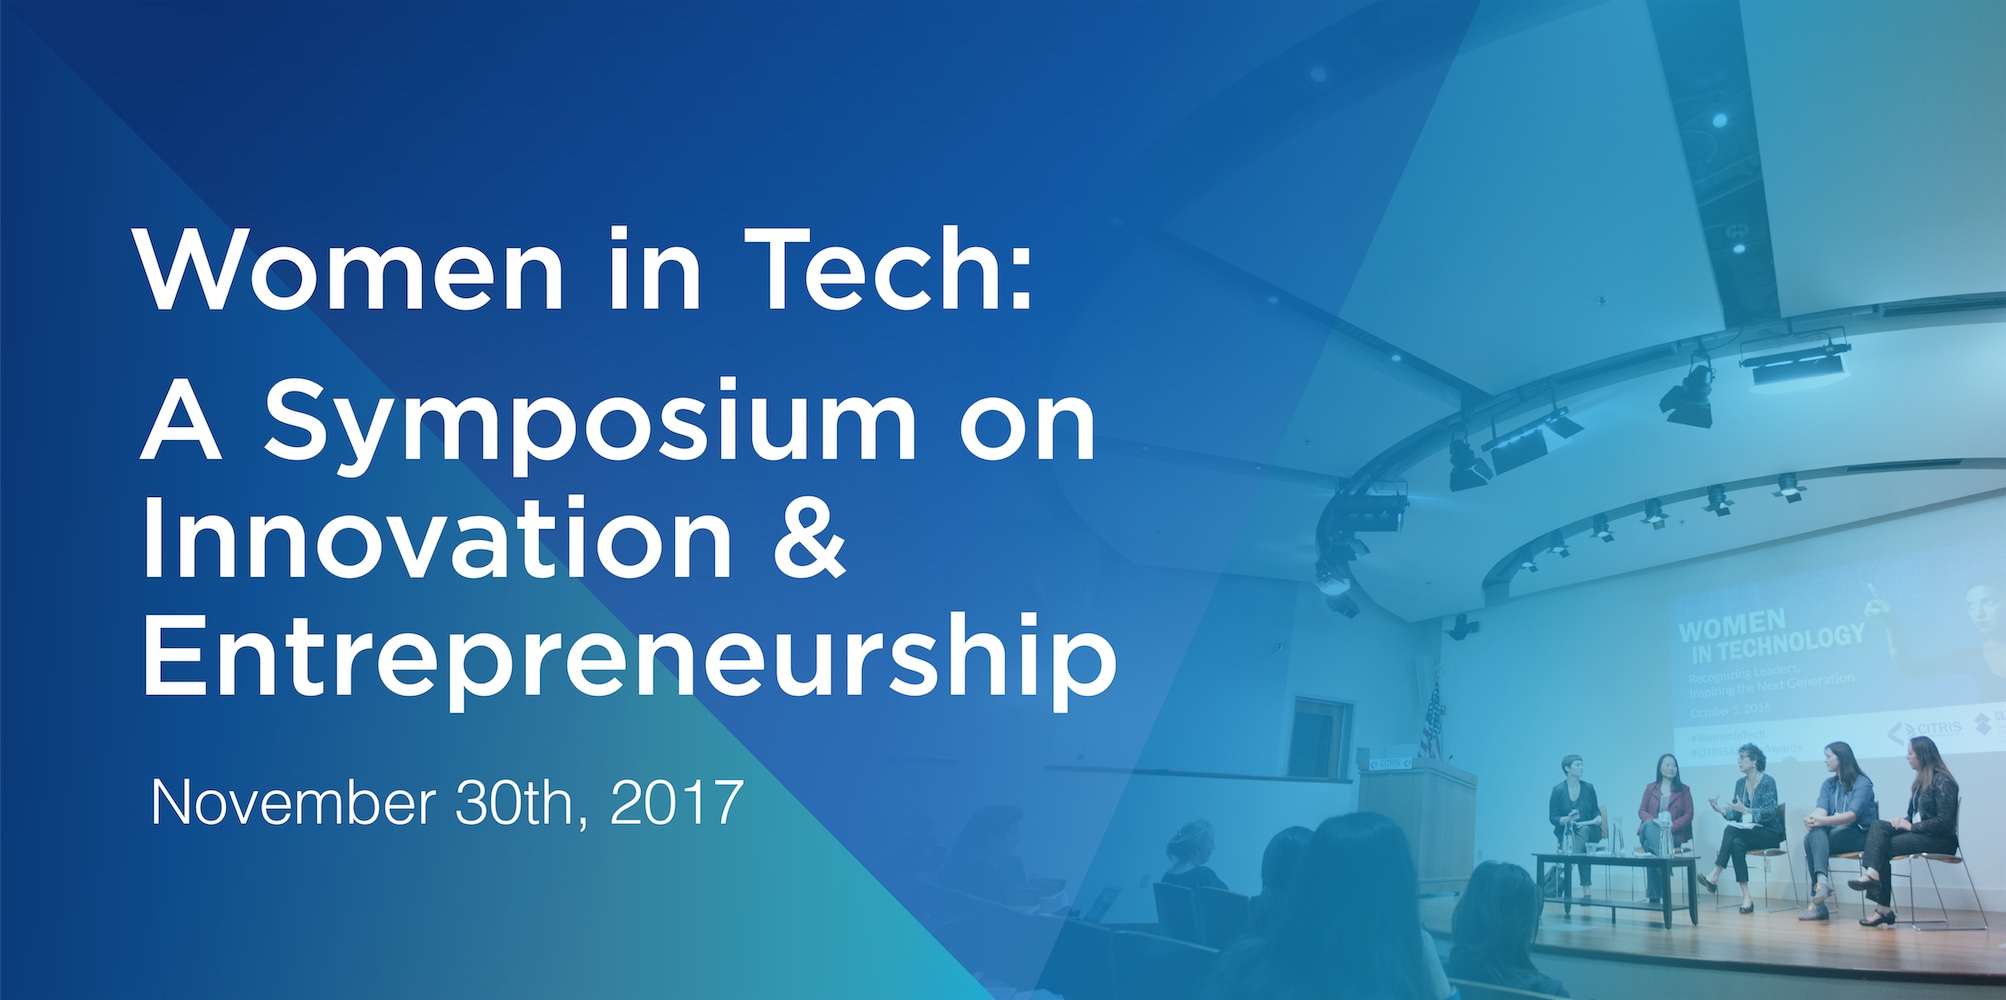 Women in Tech: A symposium on innovation and entrepreneurship